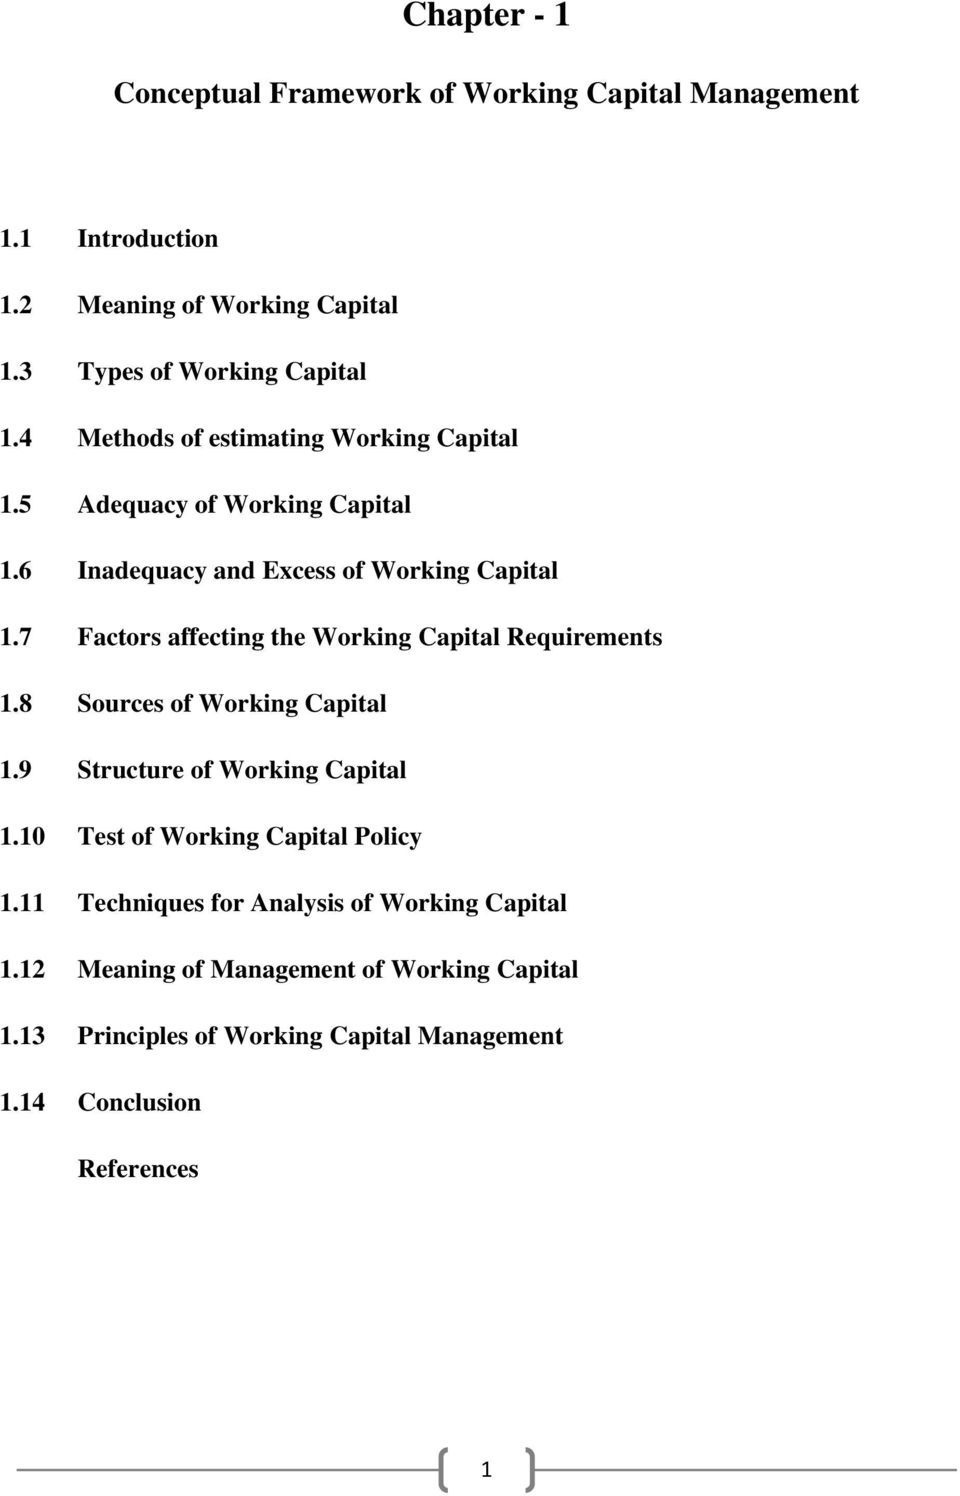 7 Factors affecting the Working Capital Requirements 1.8 Sources of Working Capital 1.9 Structure of Working Capital 1.